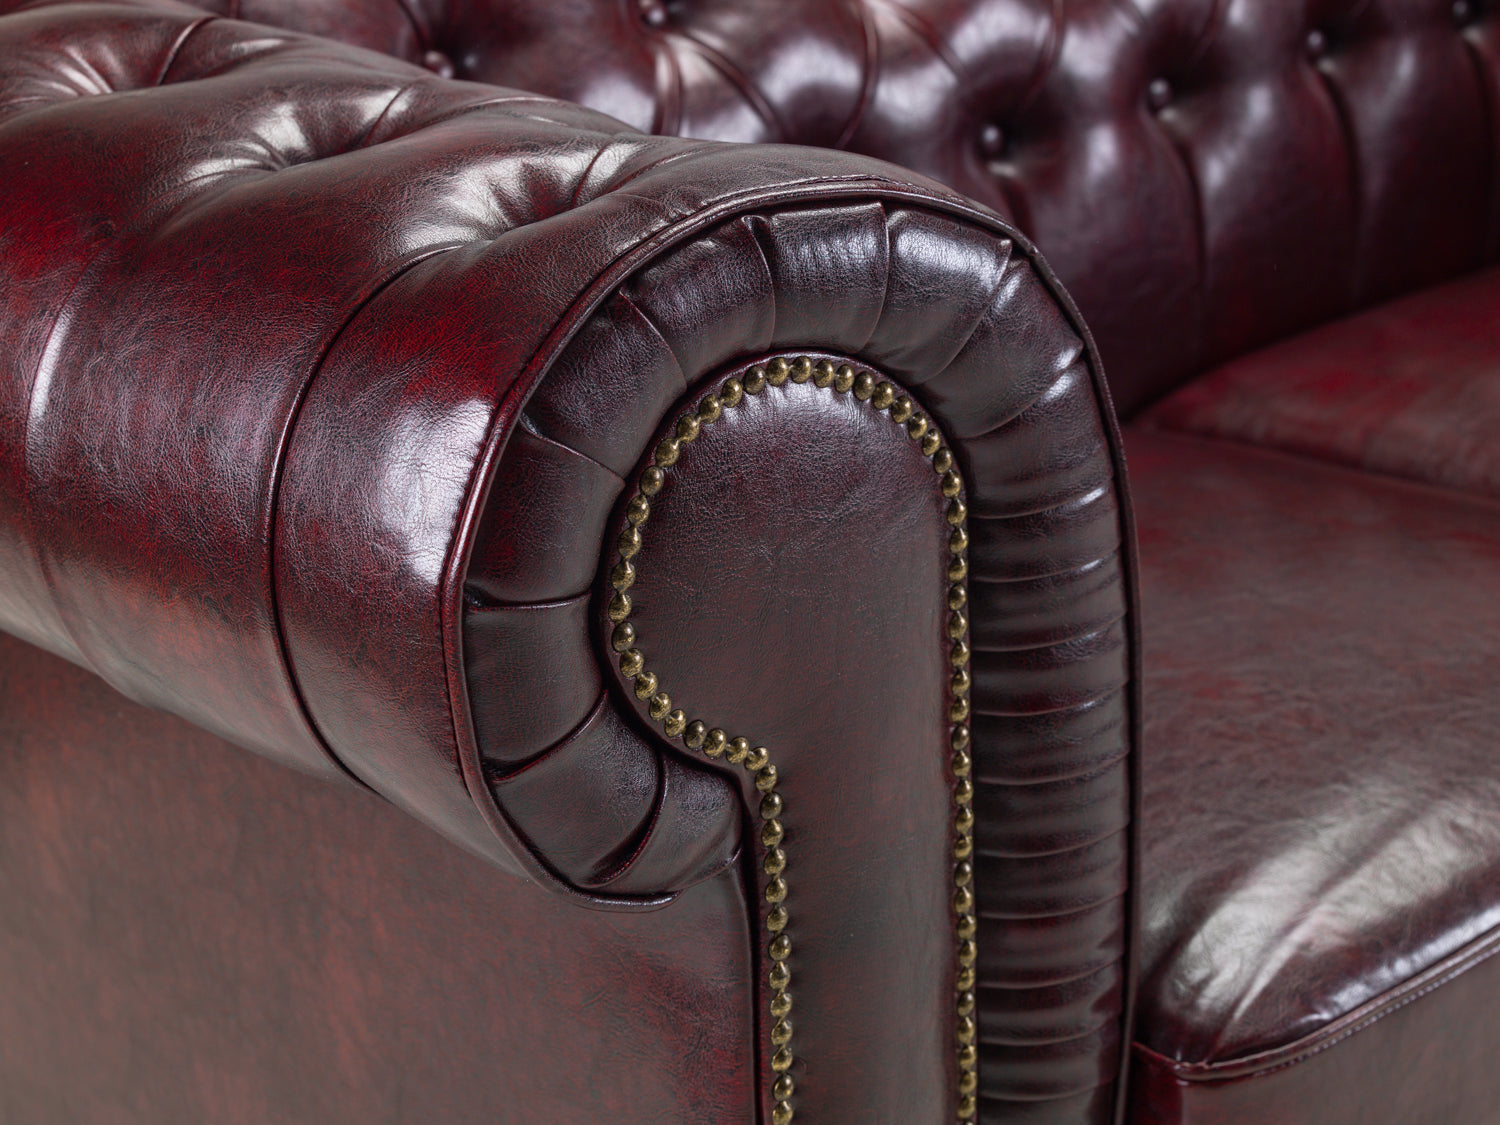 Antique Chesterfield Leather Sofa